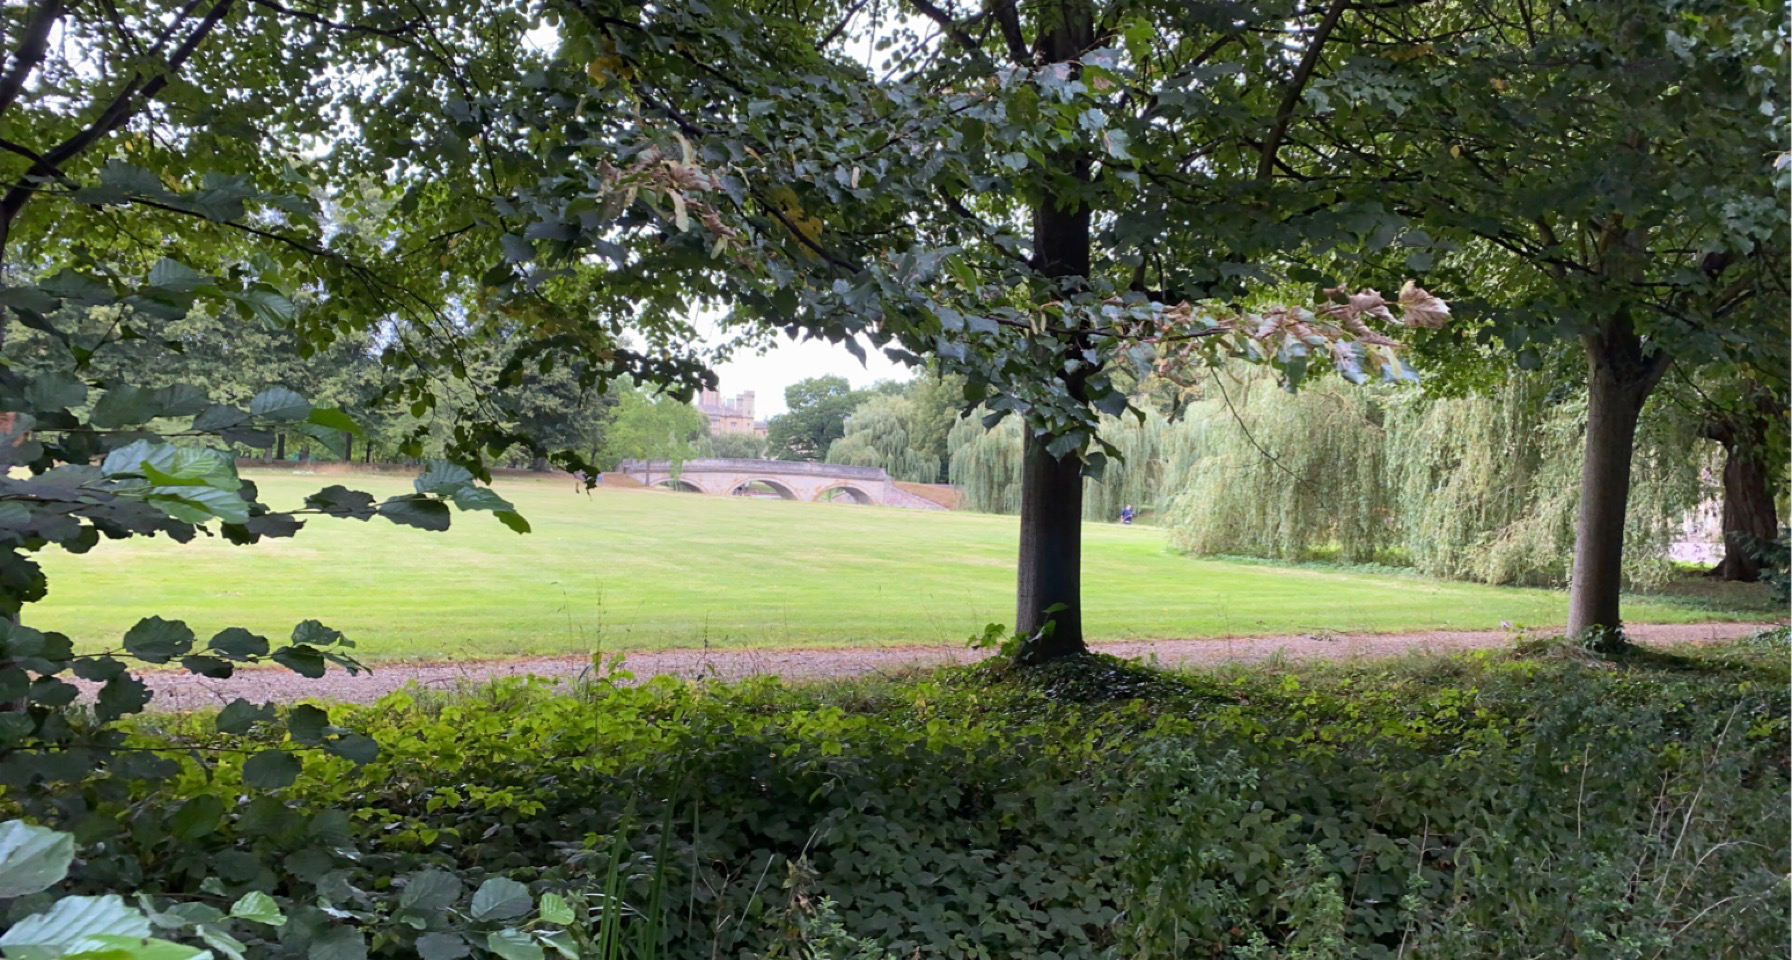 A field viewed through some trees